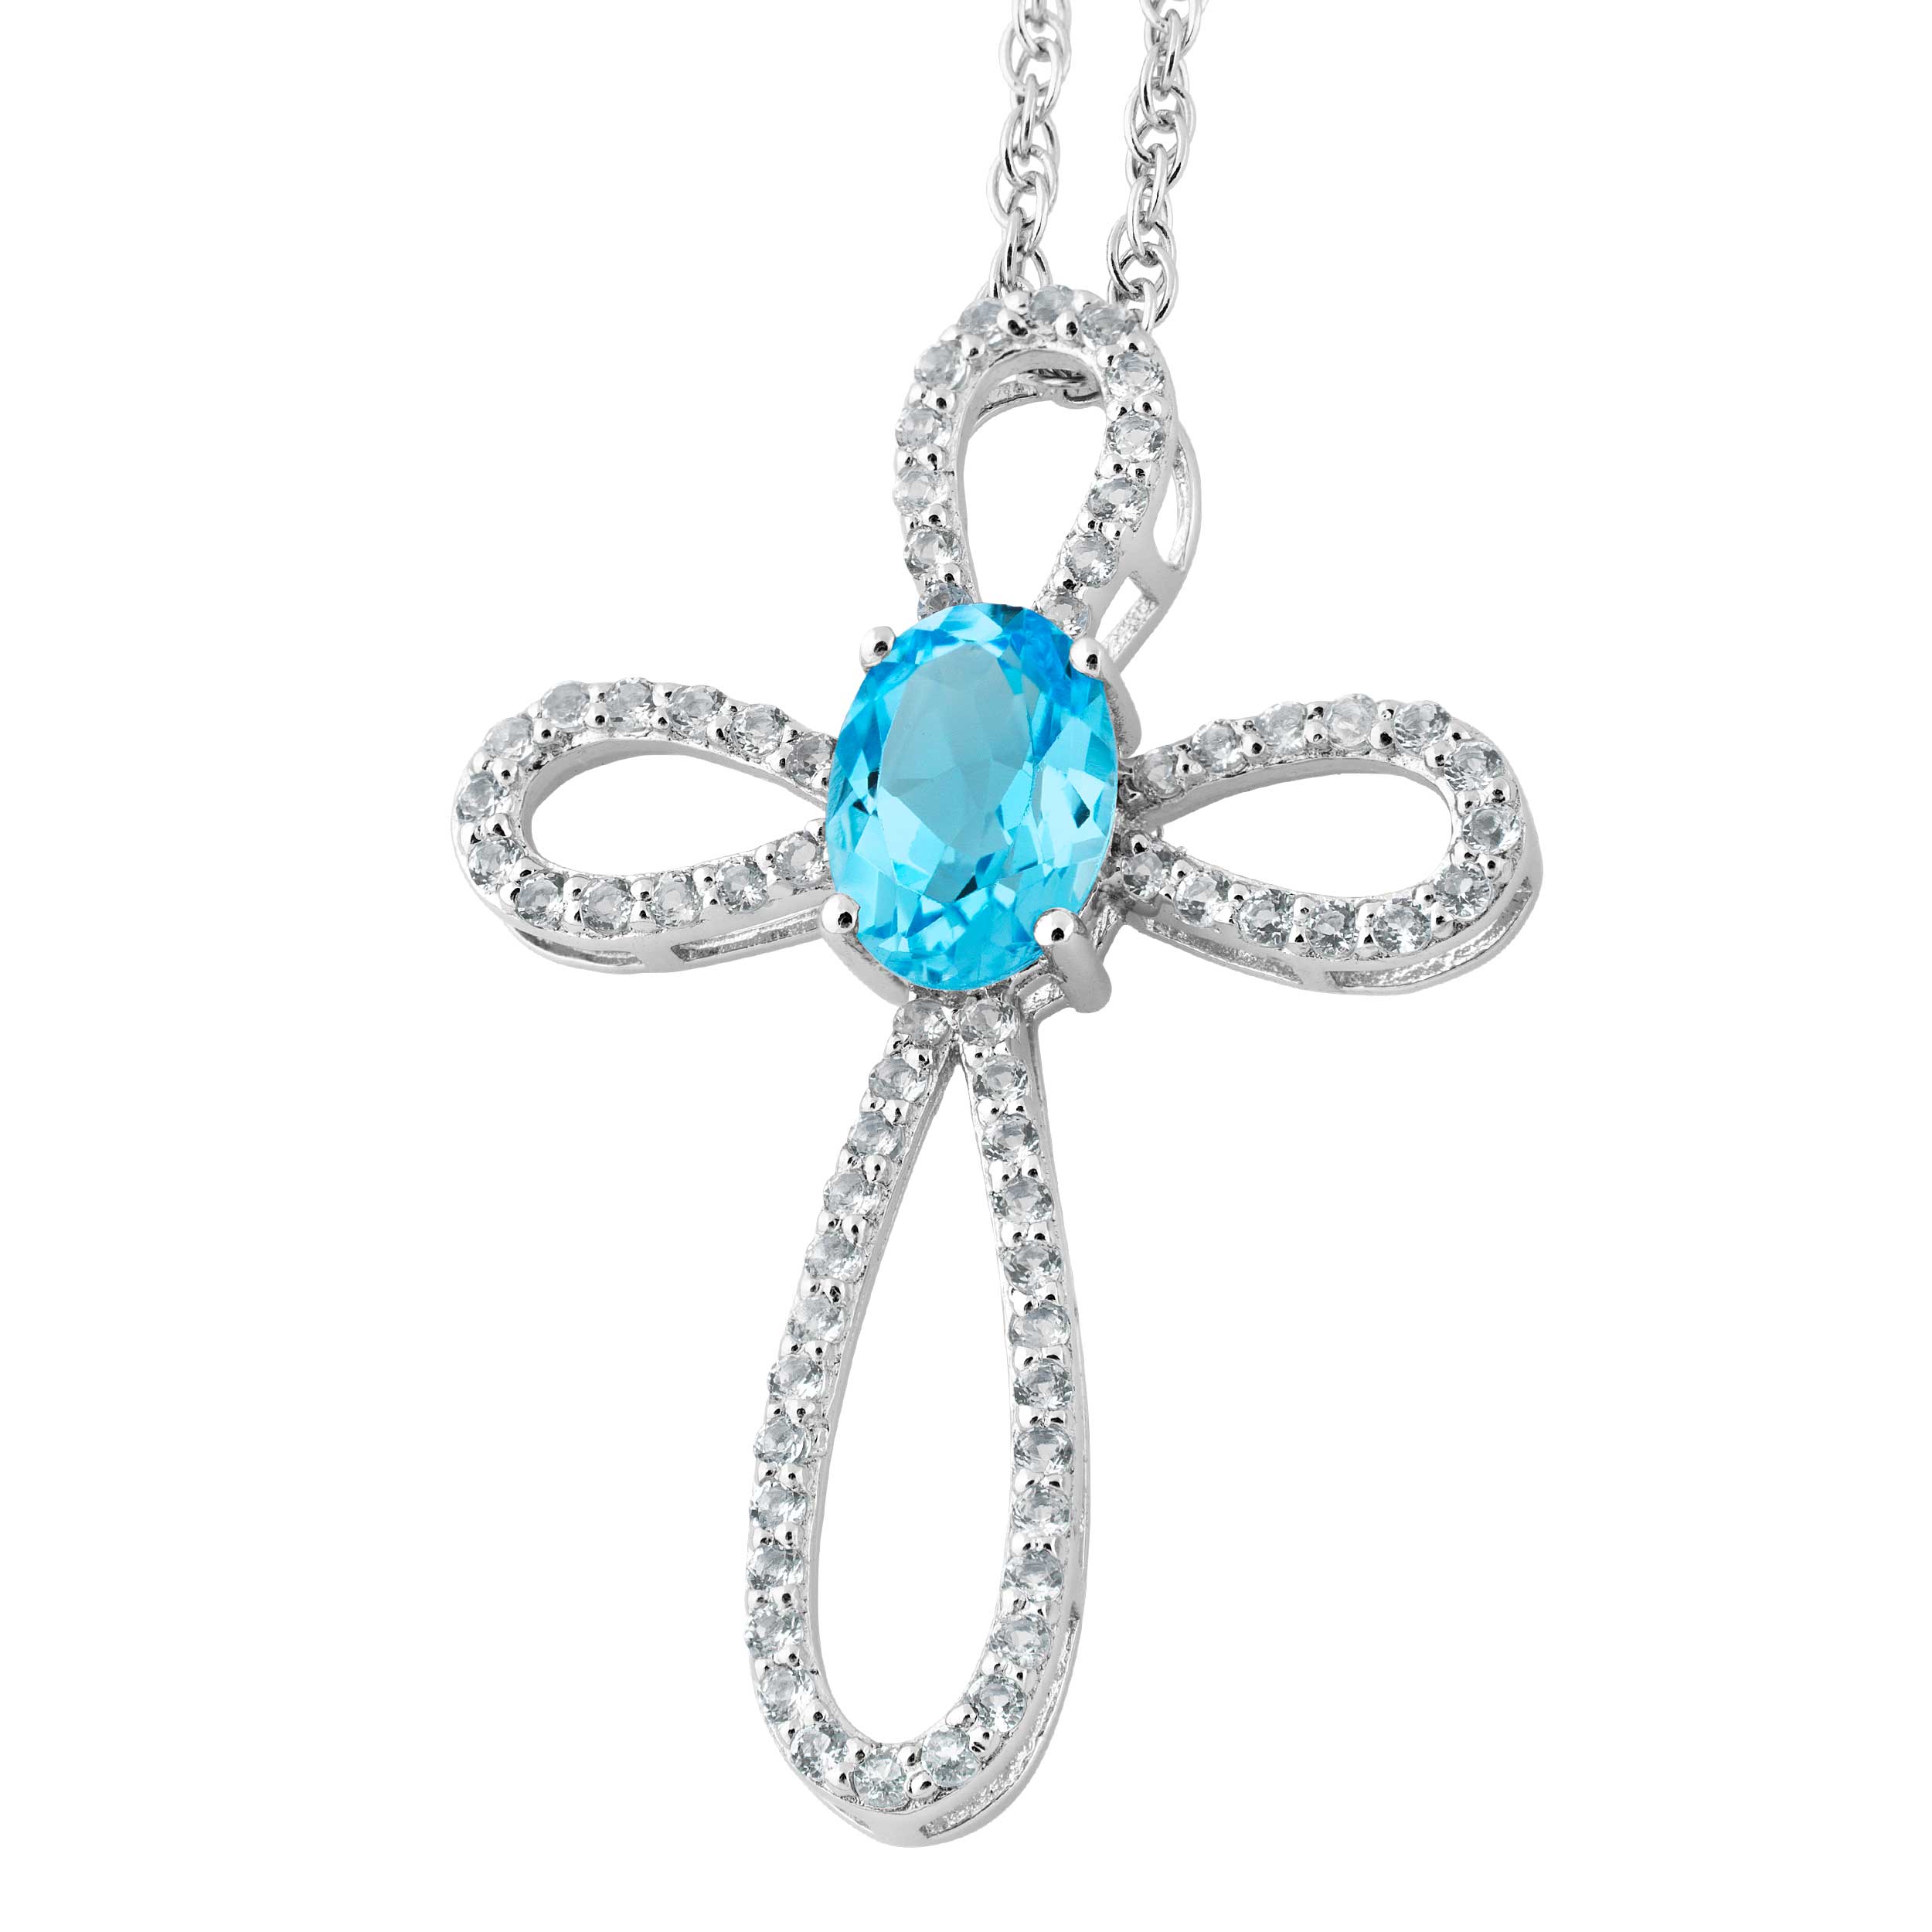 Oval  Swiss Blue Topaz and White Topaz Cross Pendant Necklace, Rhodium Plated Sterling Silver